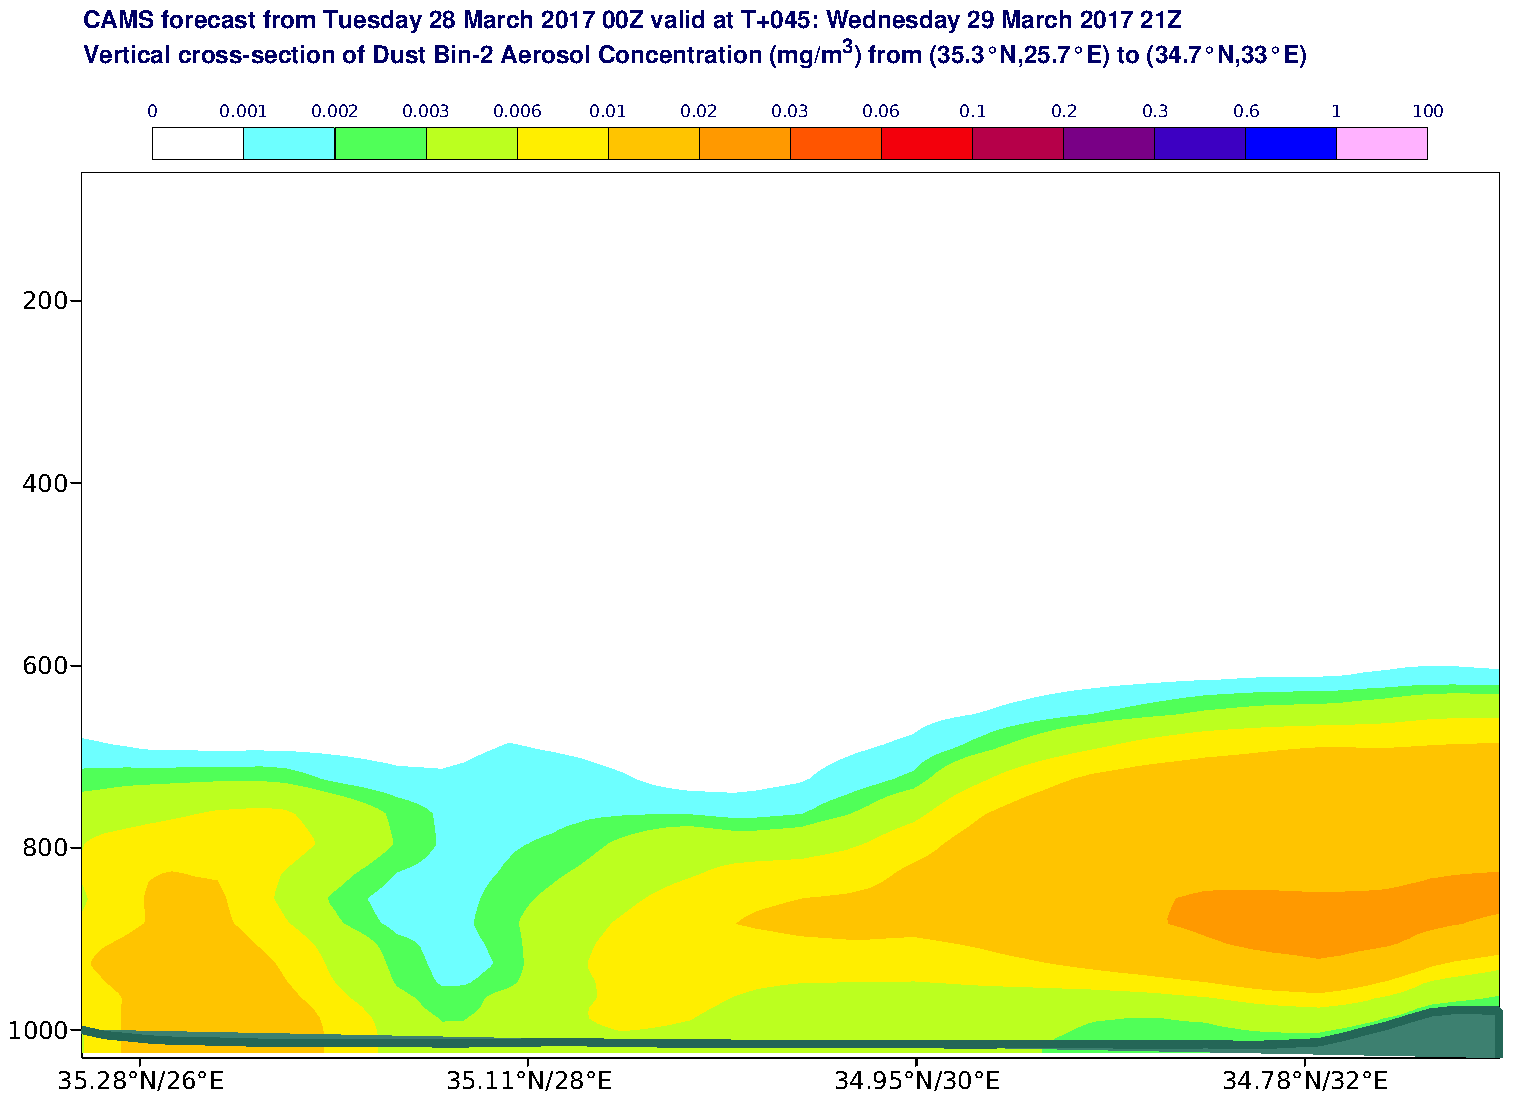 Vertical cross-section of Dust Bin-2 Aerosol Concentration (mg/m3) valid at T45 - 2017-03-29 21:00